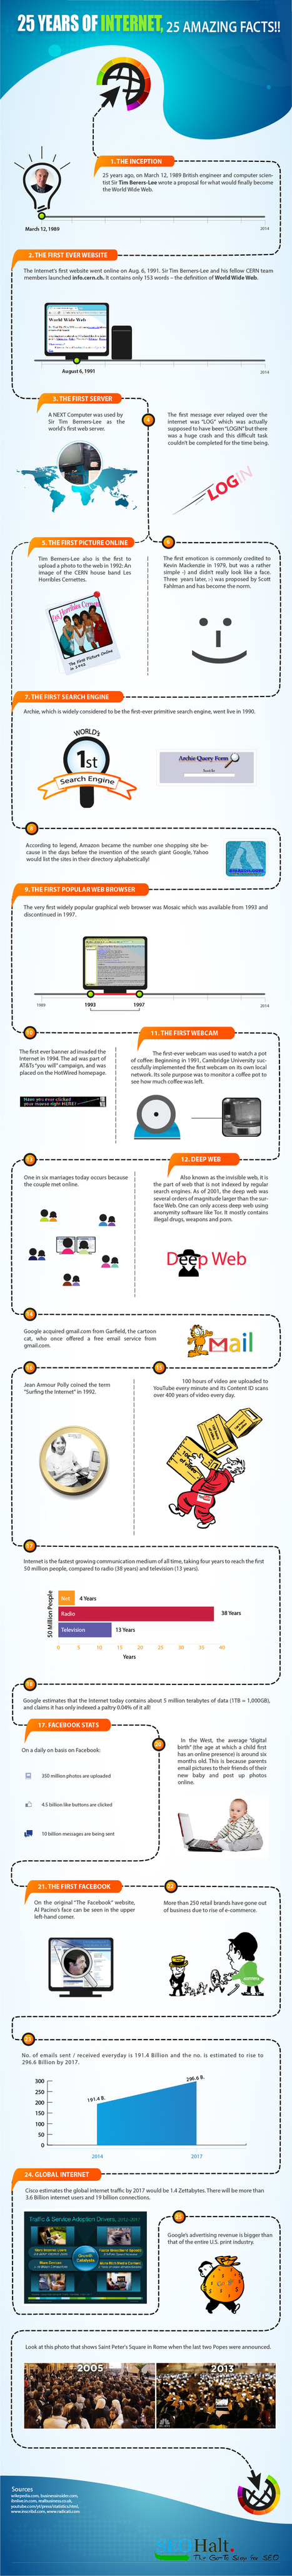 25 Amazing Facts about the Internet [Infographic] | digital marketing strategy | Scoop.it